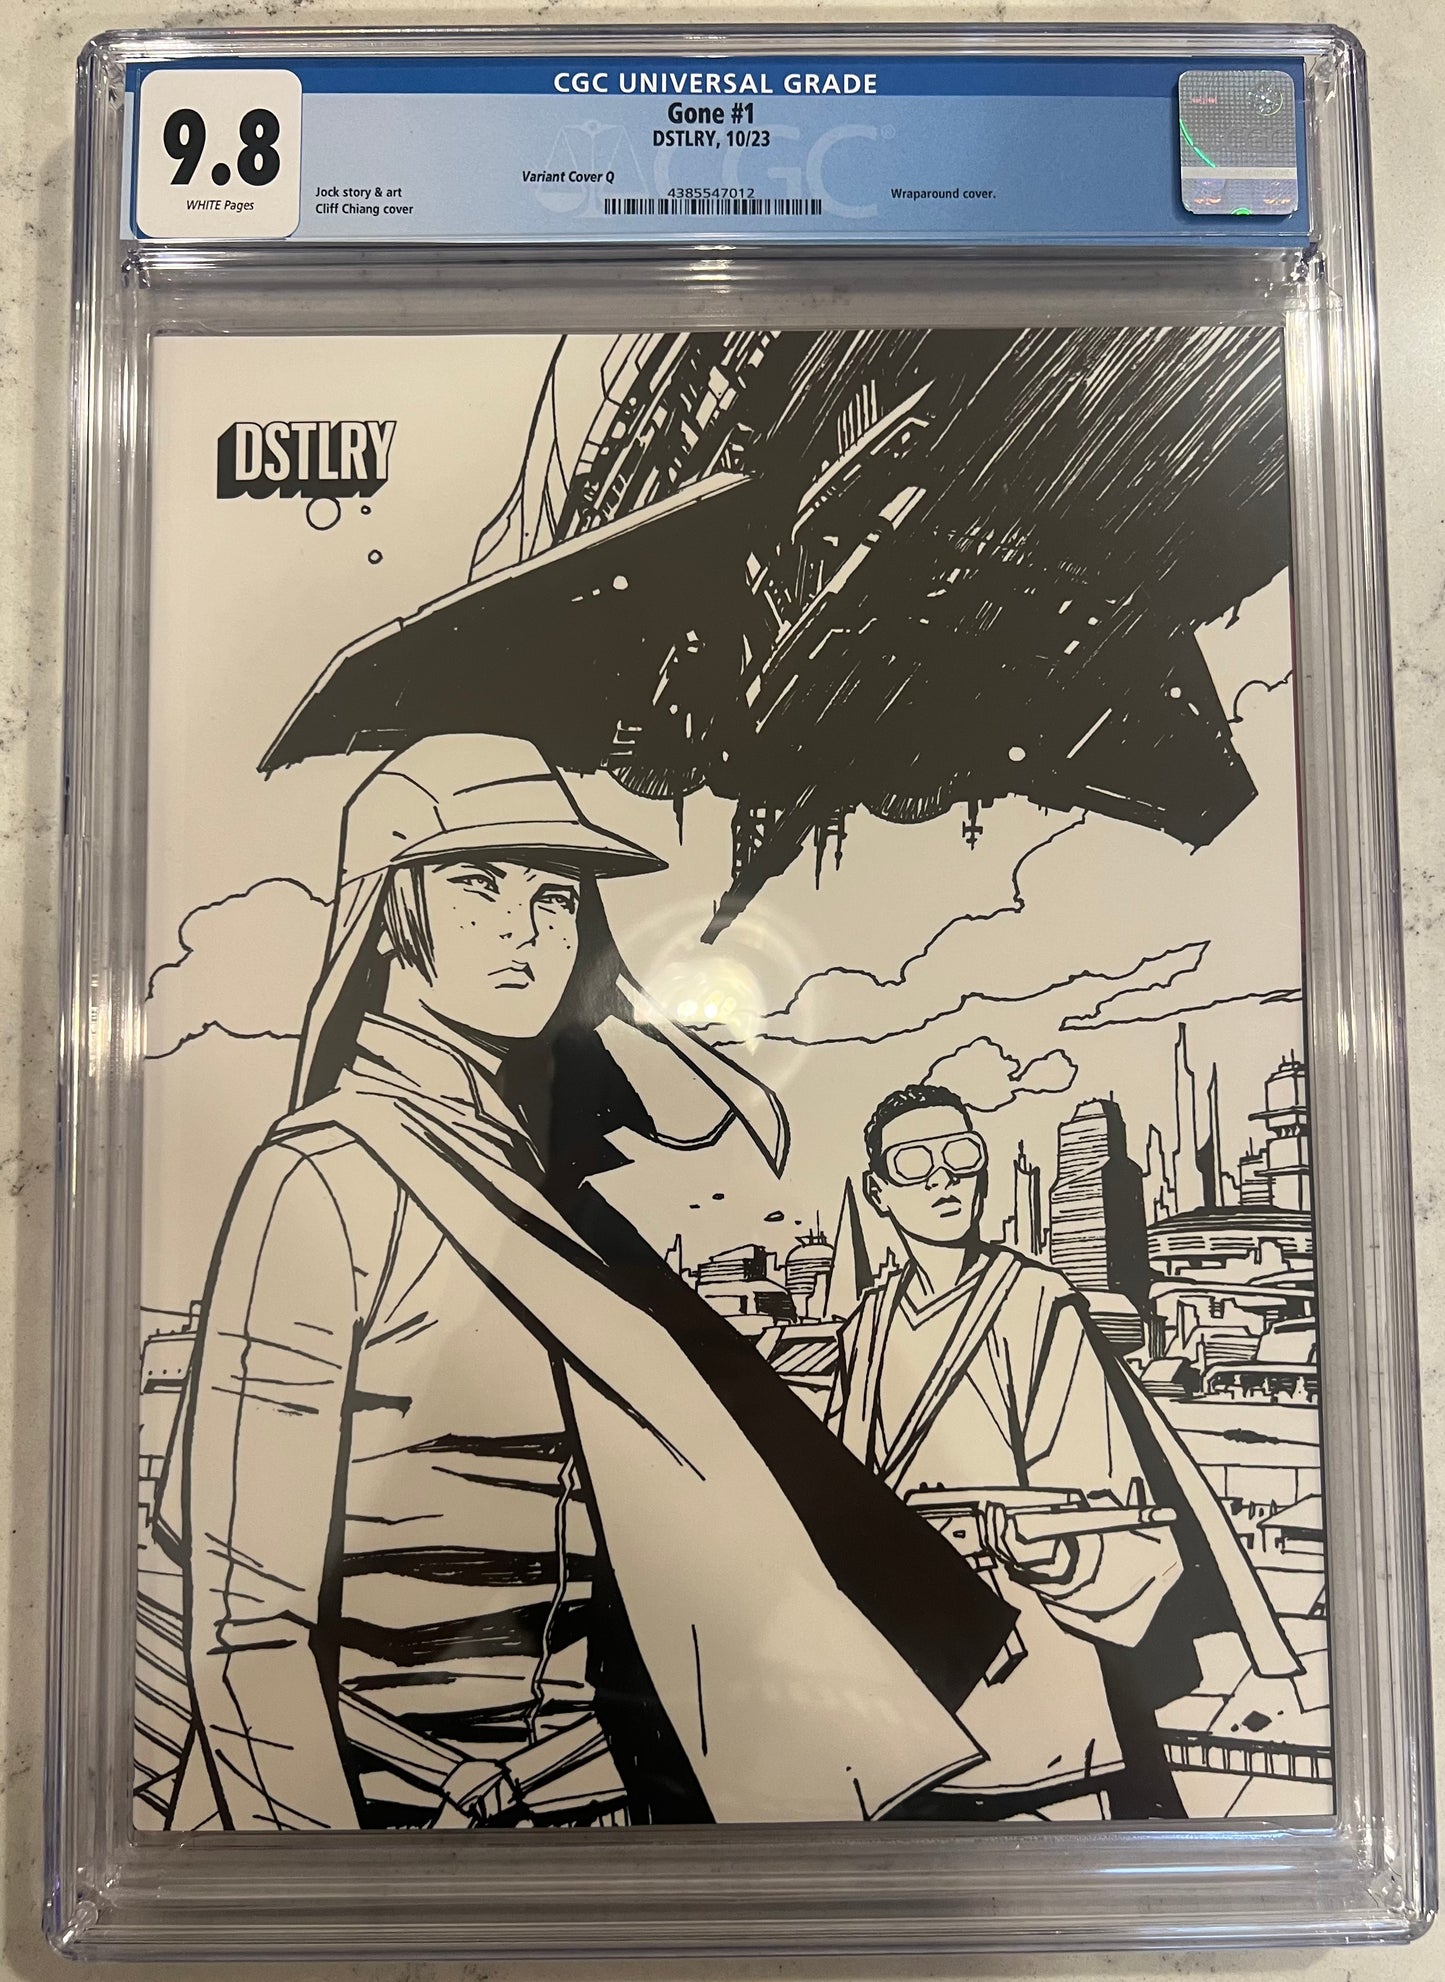 Gone #1 CGC 9.8 (DSTLRY) By Jock Exclusive Cliff Chiang BW variant (VERY RARE)